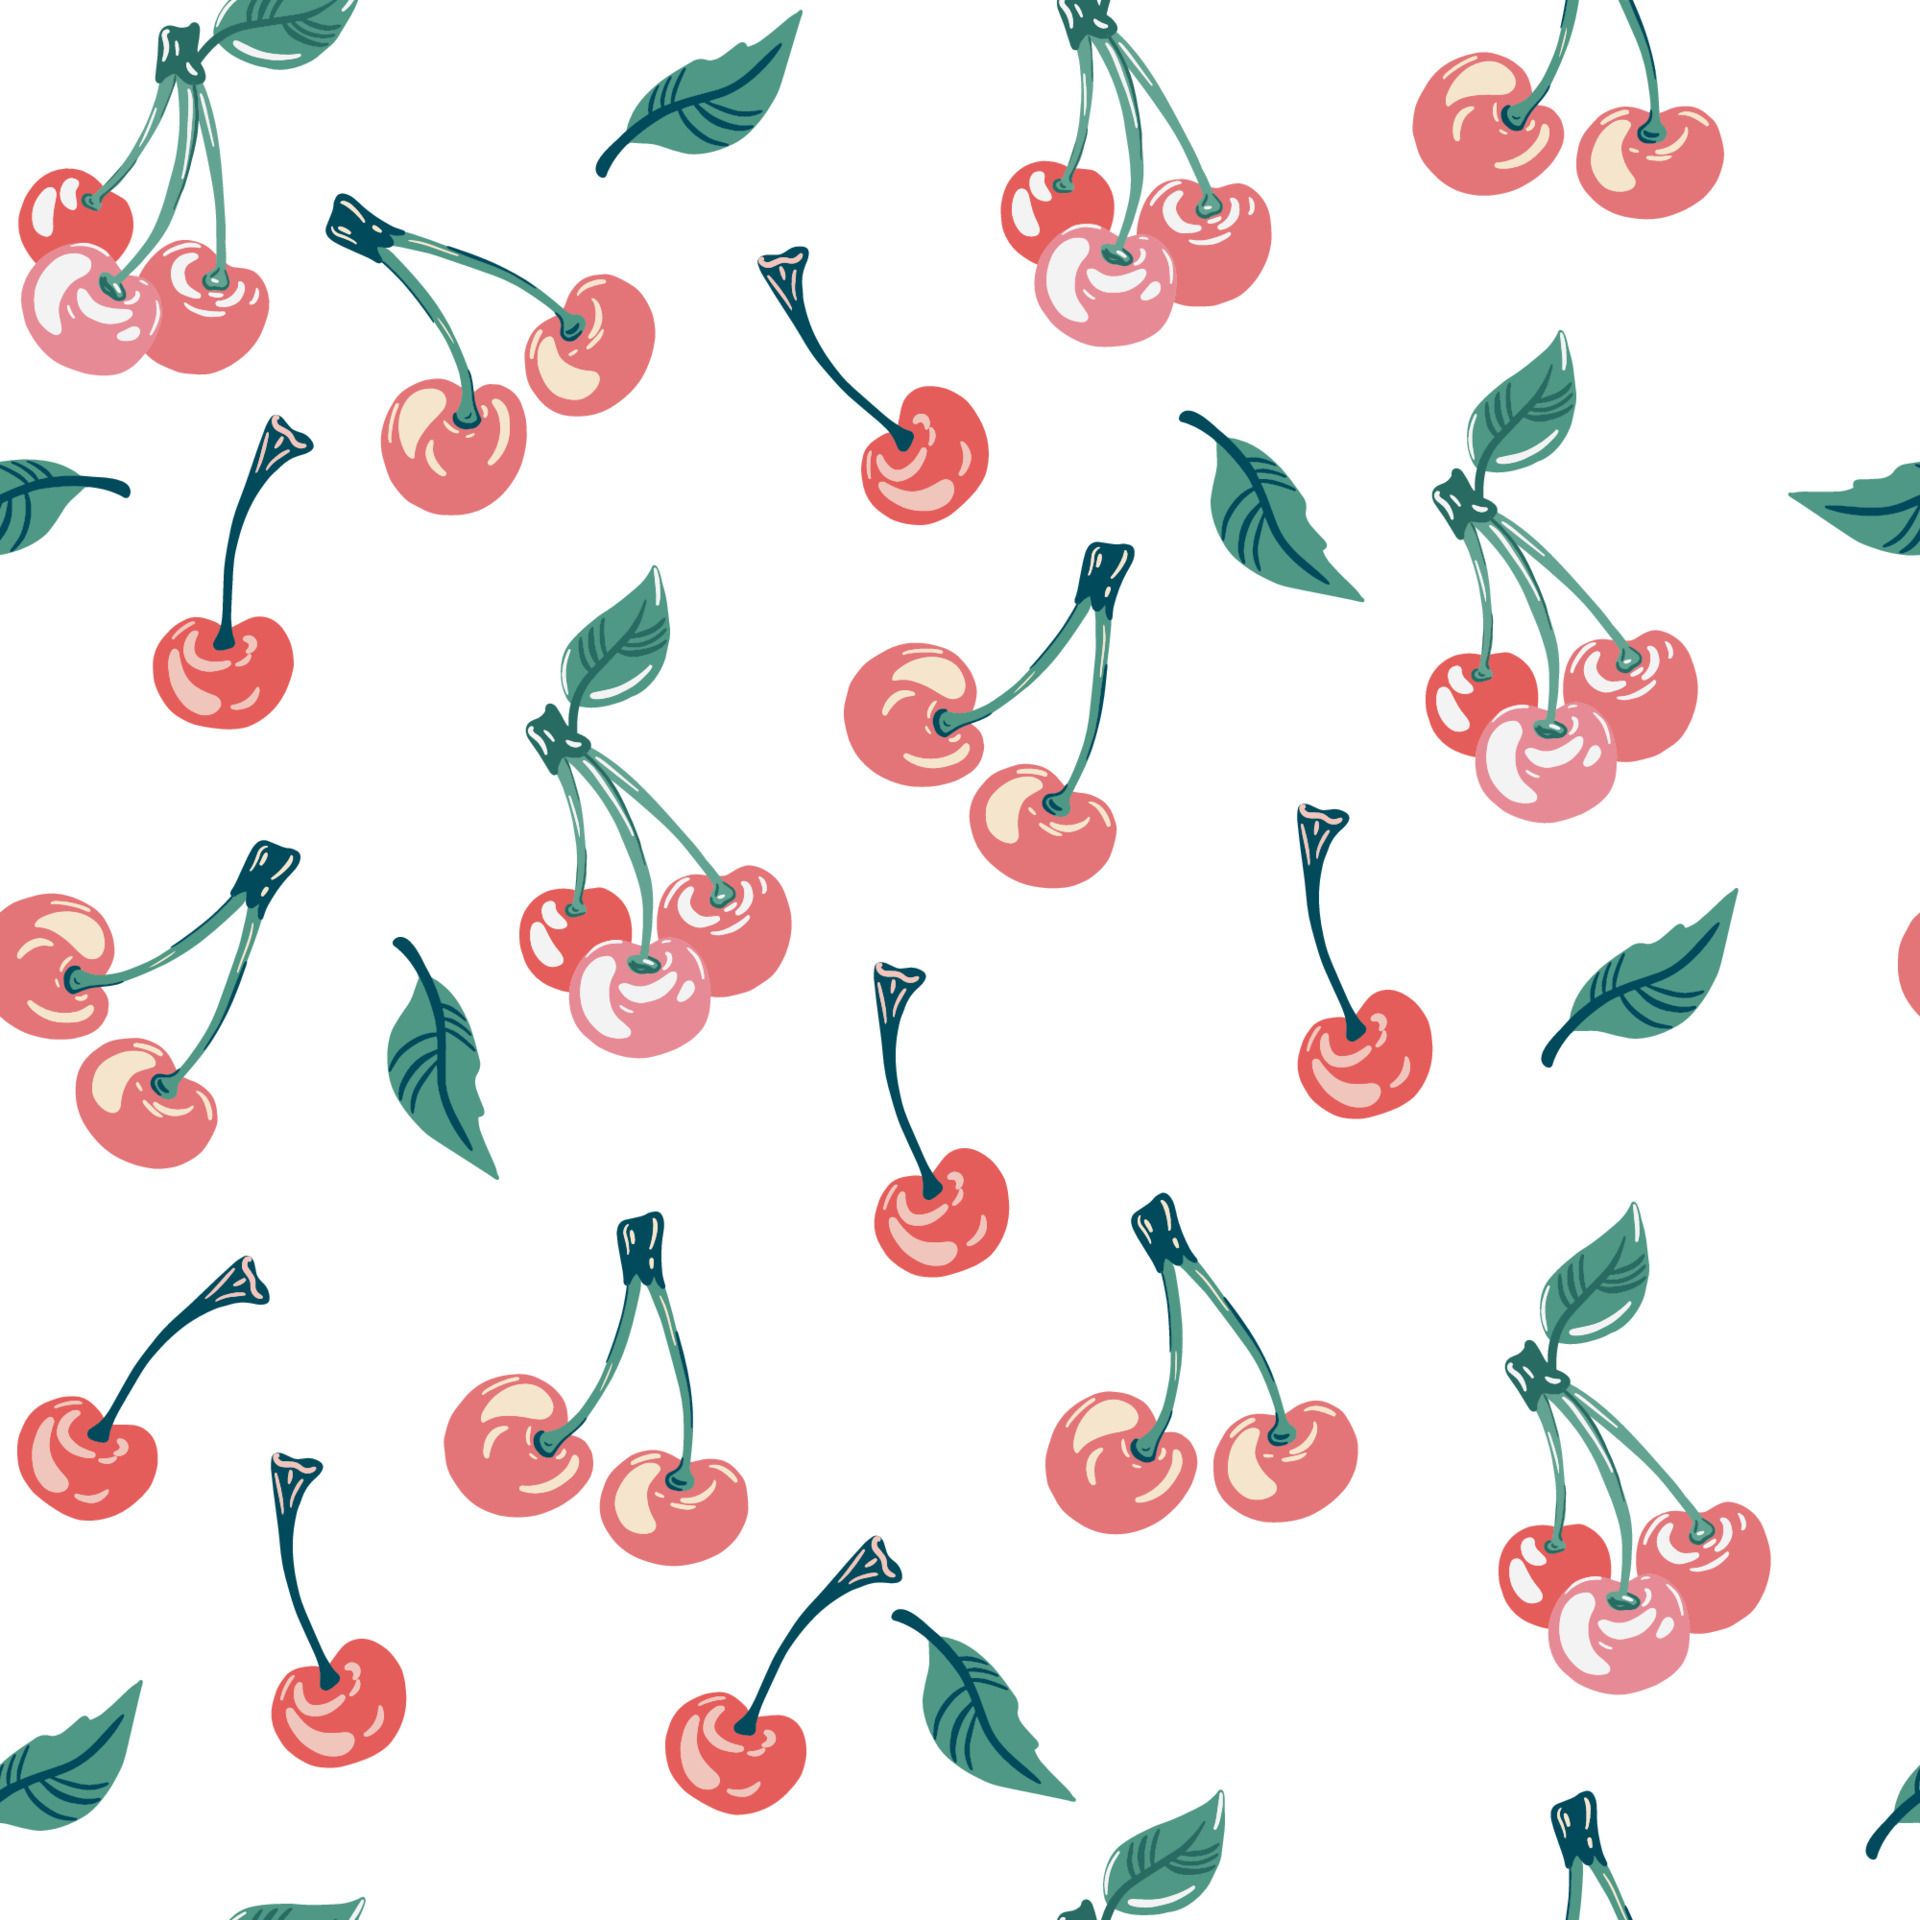 Cherry seamless pattern. Fresh Fruits, food, healthy food concept. Good for textile, wrapping, wallpaper, etc. Sweet red ripe cherries isolated on white background. Vector illustration